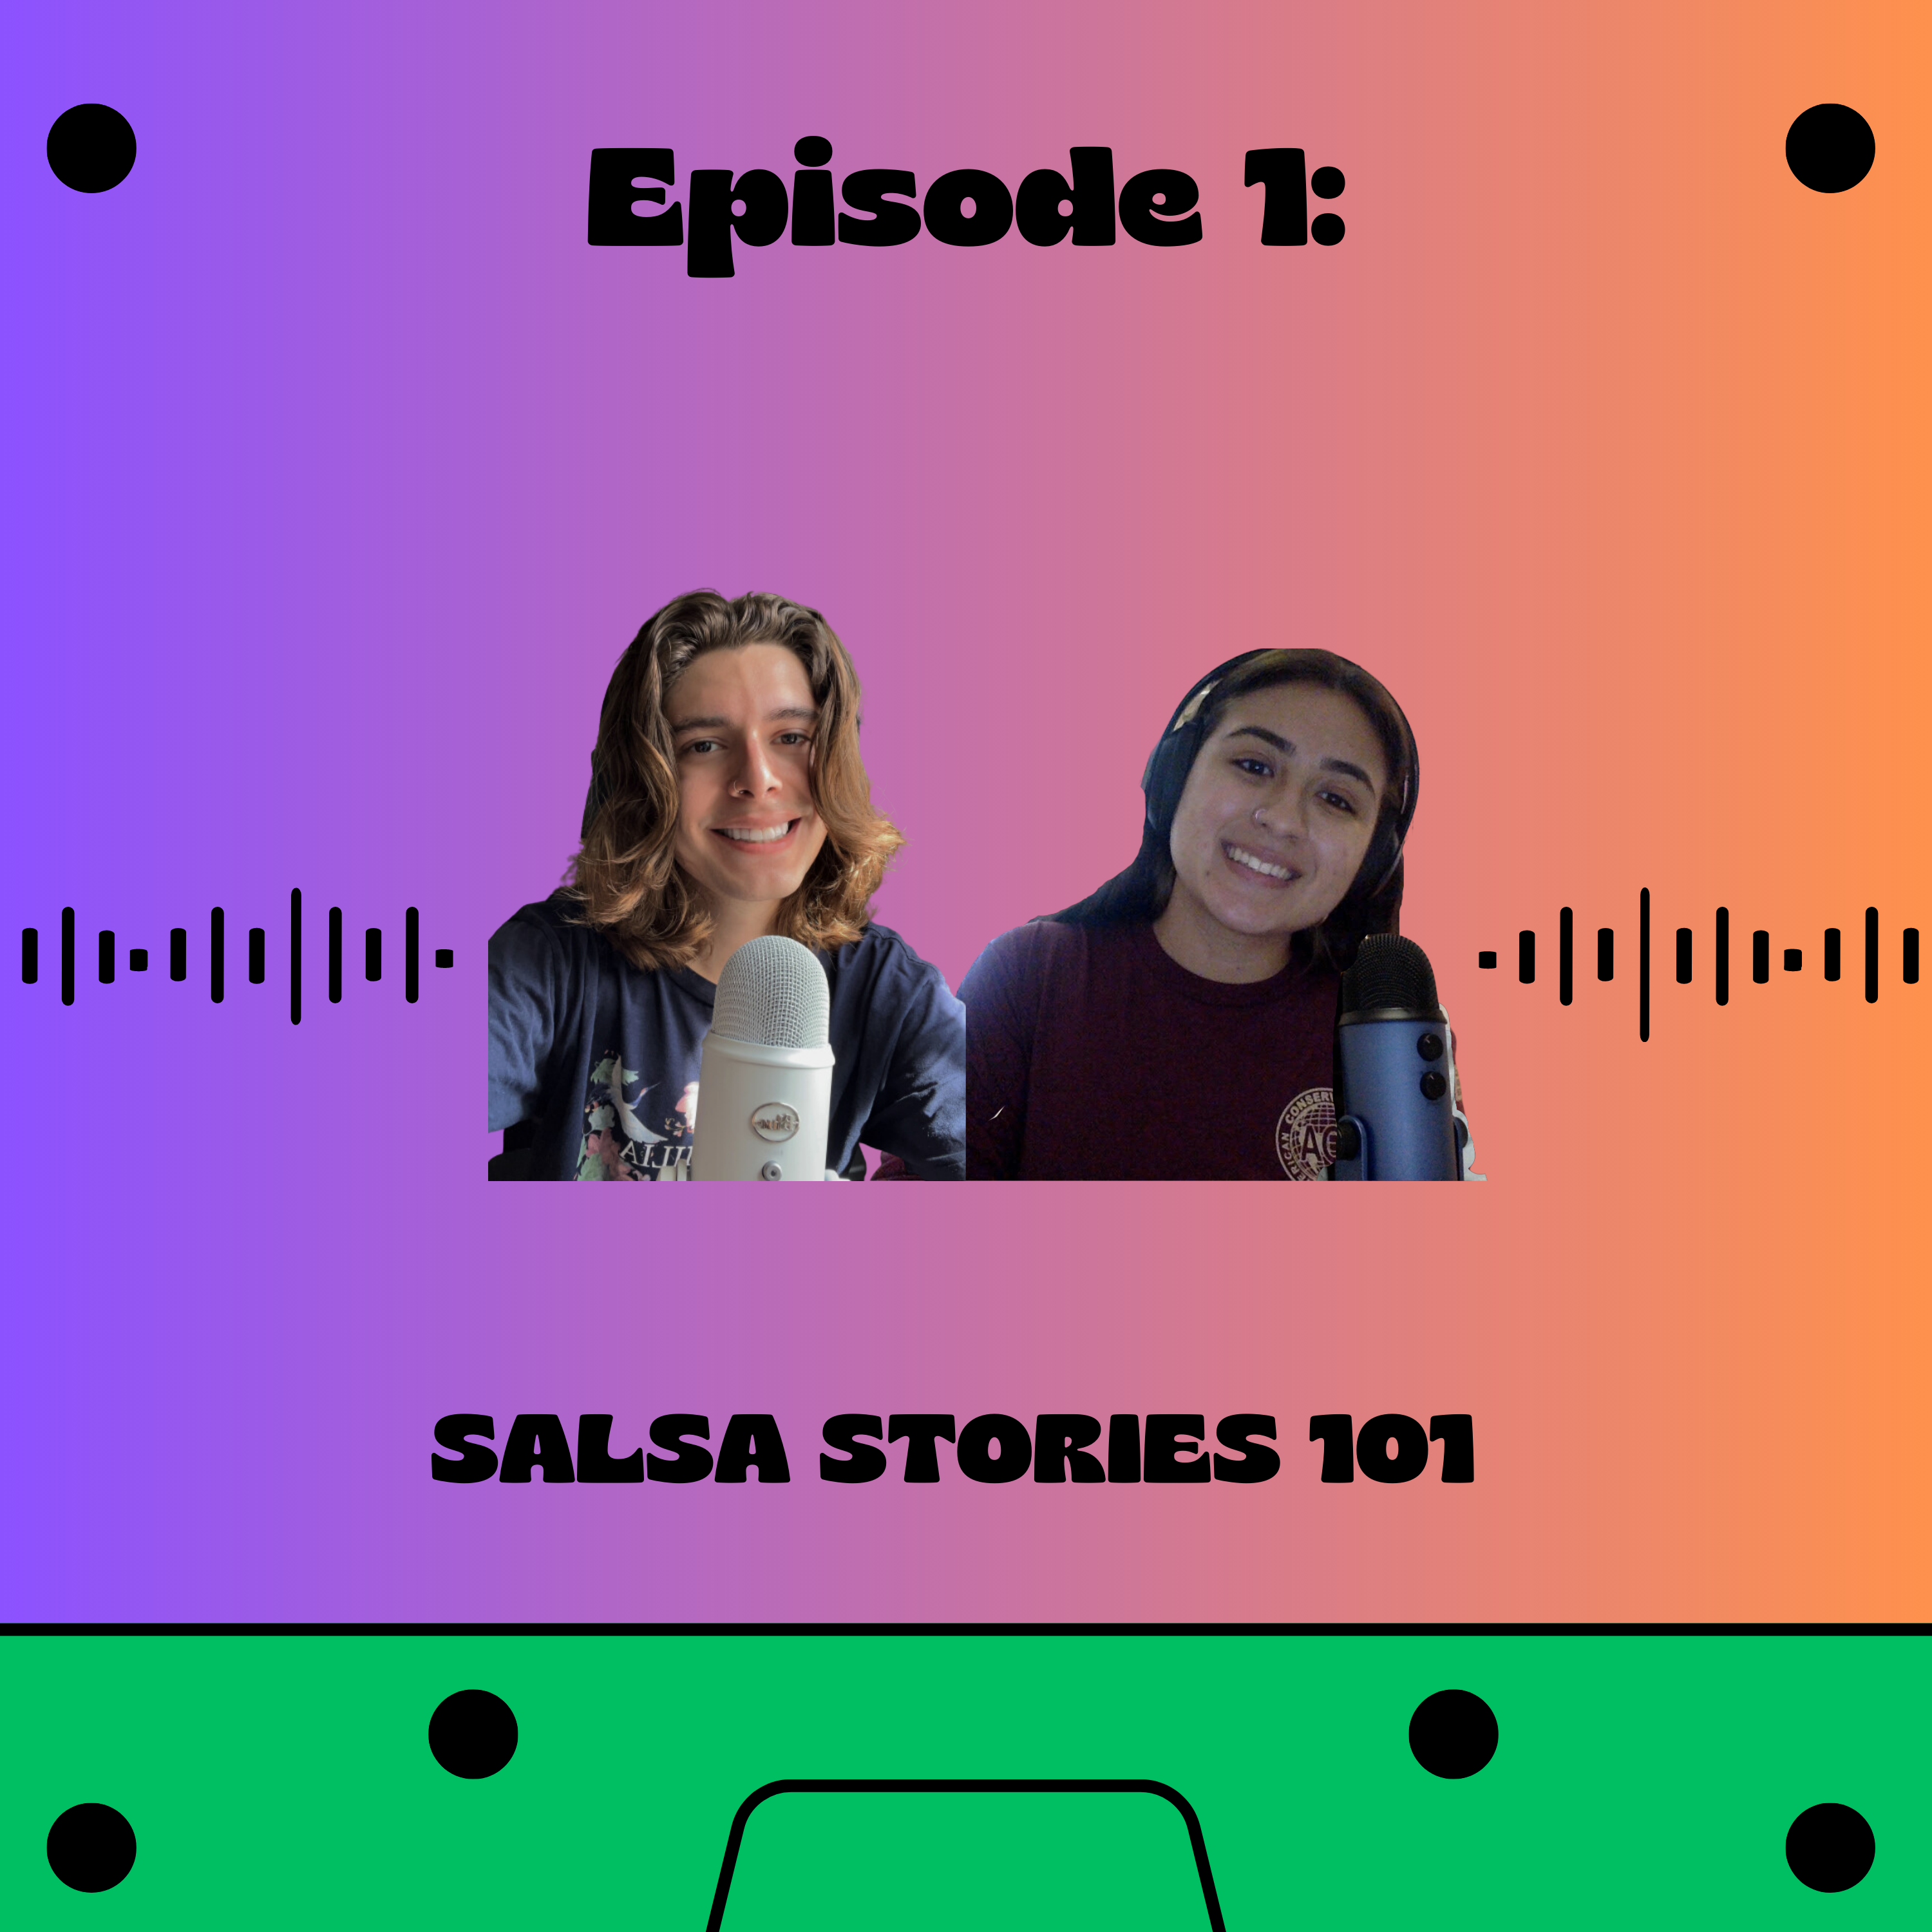 The cover for Episode 1 of the Oíste? Podcast series. The text on the photo reads Oíste? Podcast Salsa Stories 101. There is a picture of two interns smiling holding microphones and wearing headphones in the middle.